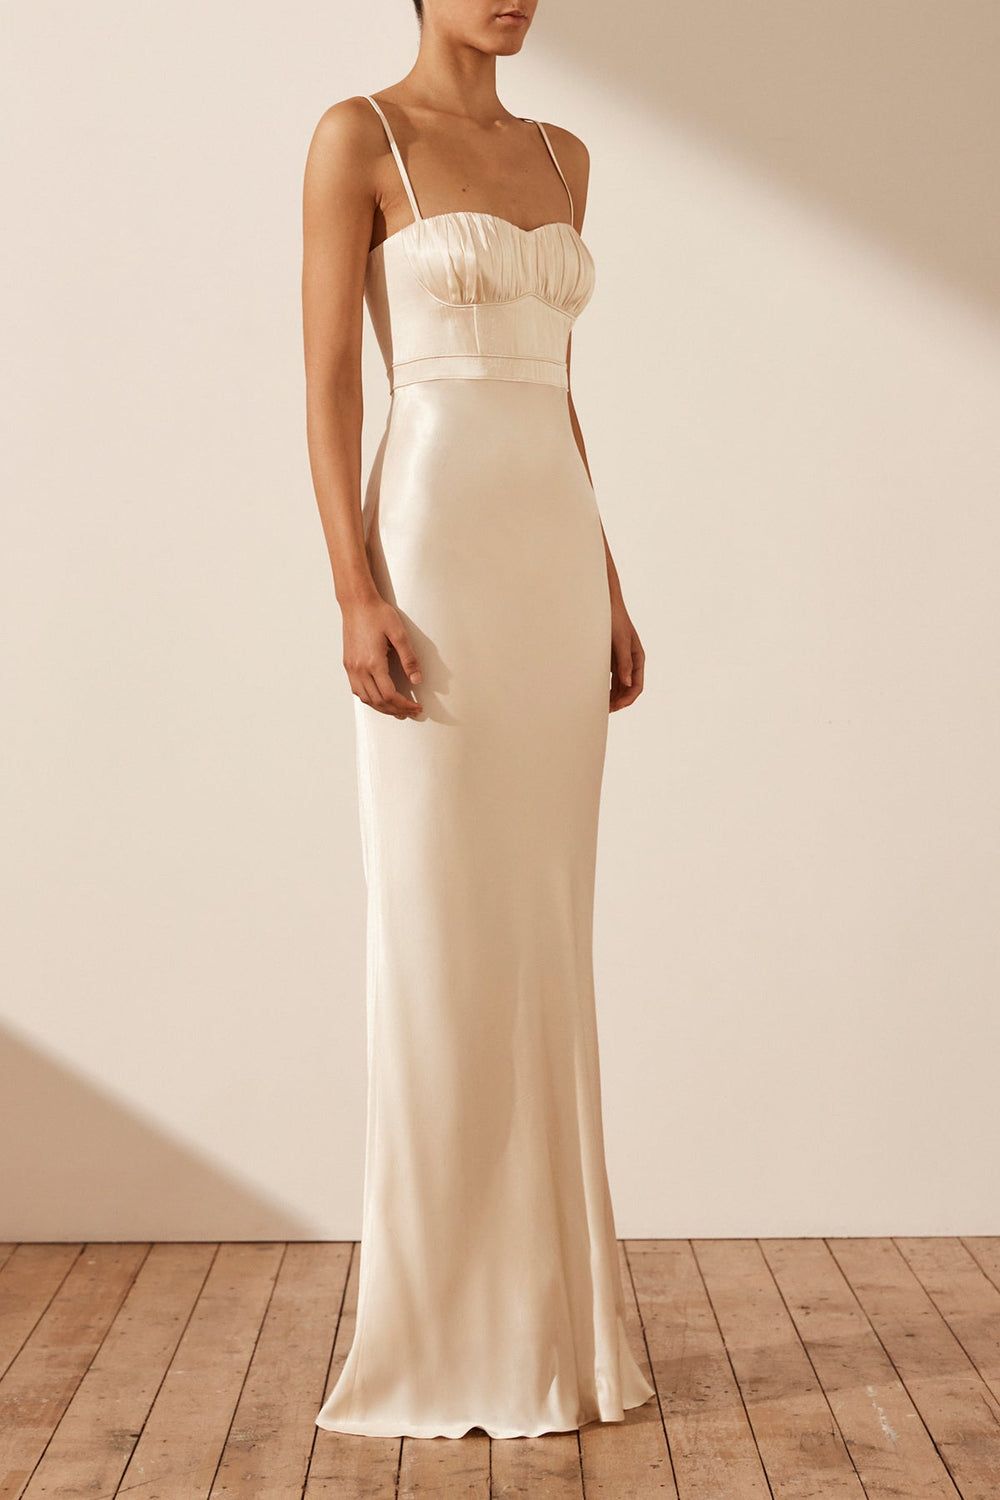 Look Elegant and Timeless in Stylish
Ivory Dresses: Effortless Elegance for Every Occasion